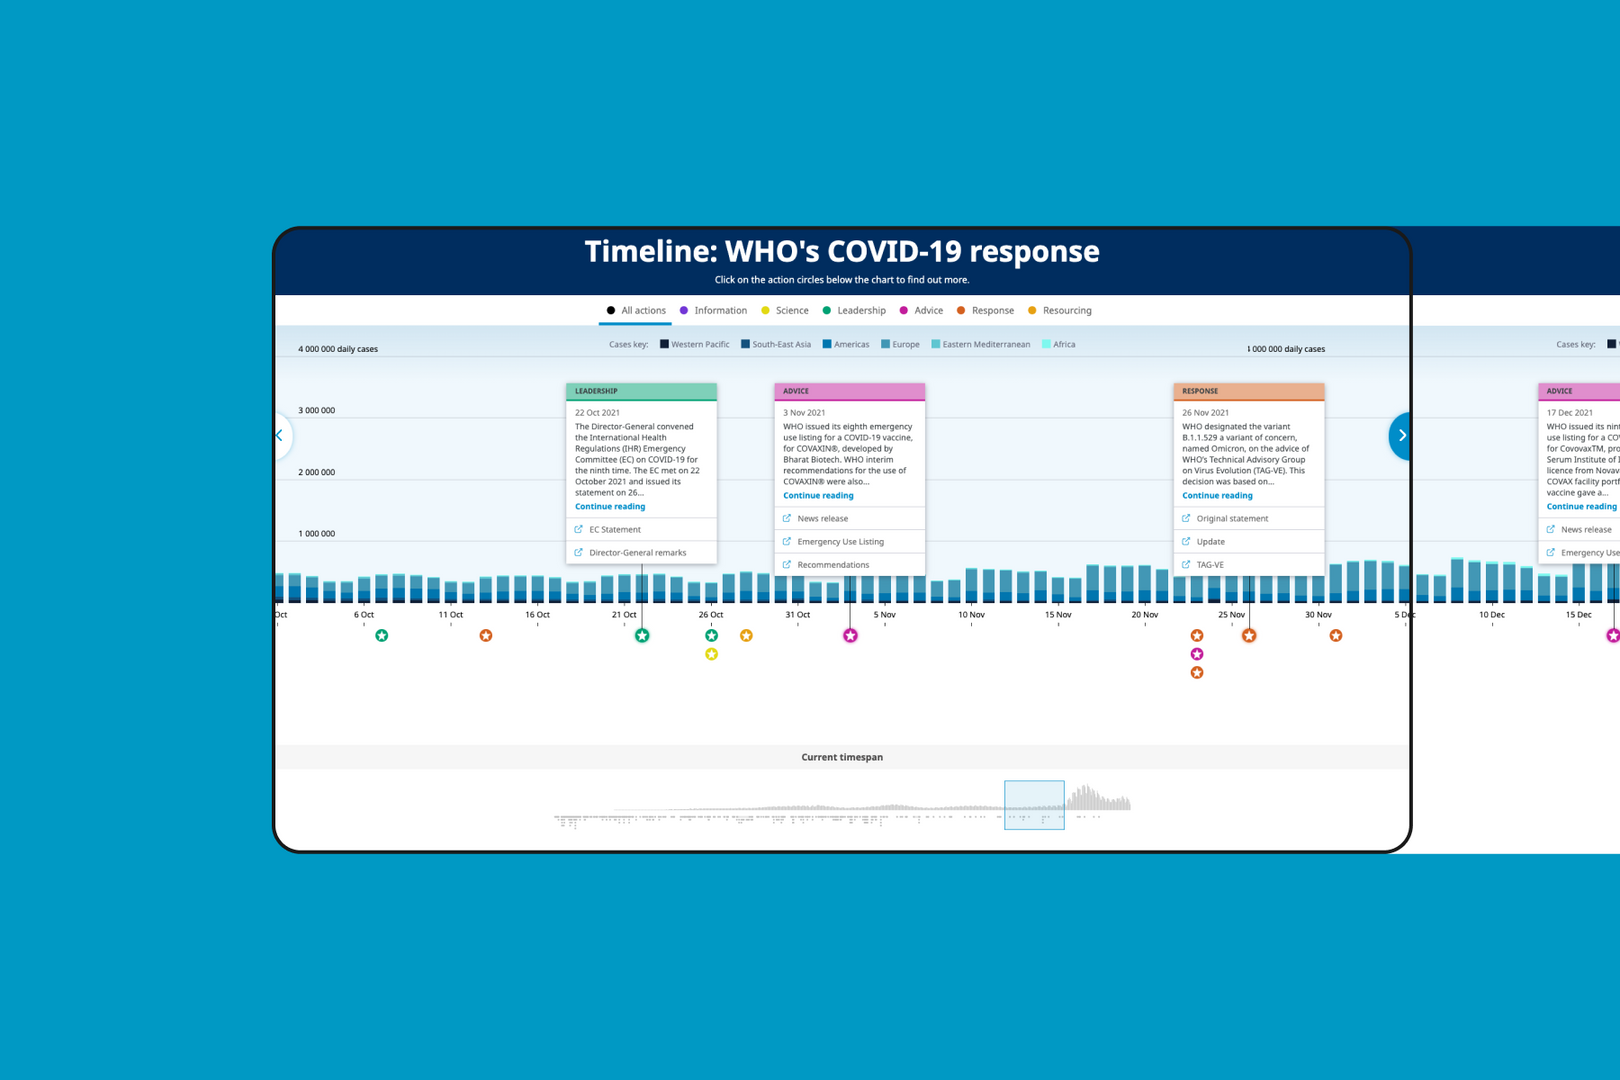 A screenshot of the WHO COVID timeline in front of a blue background. The timeline is a bar chart of daily COVID cases with colourful bubbles under each one representing key events. Text boxes stick out of some of the event bubbles with more information on each event.